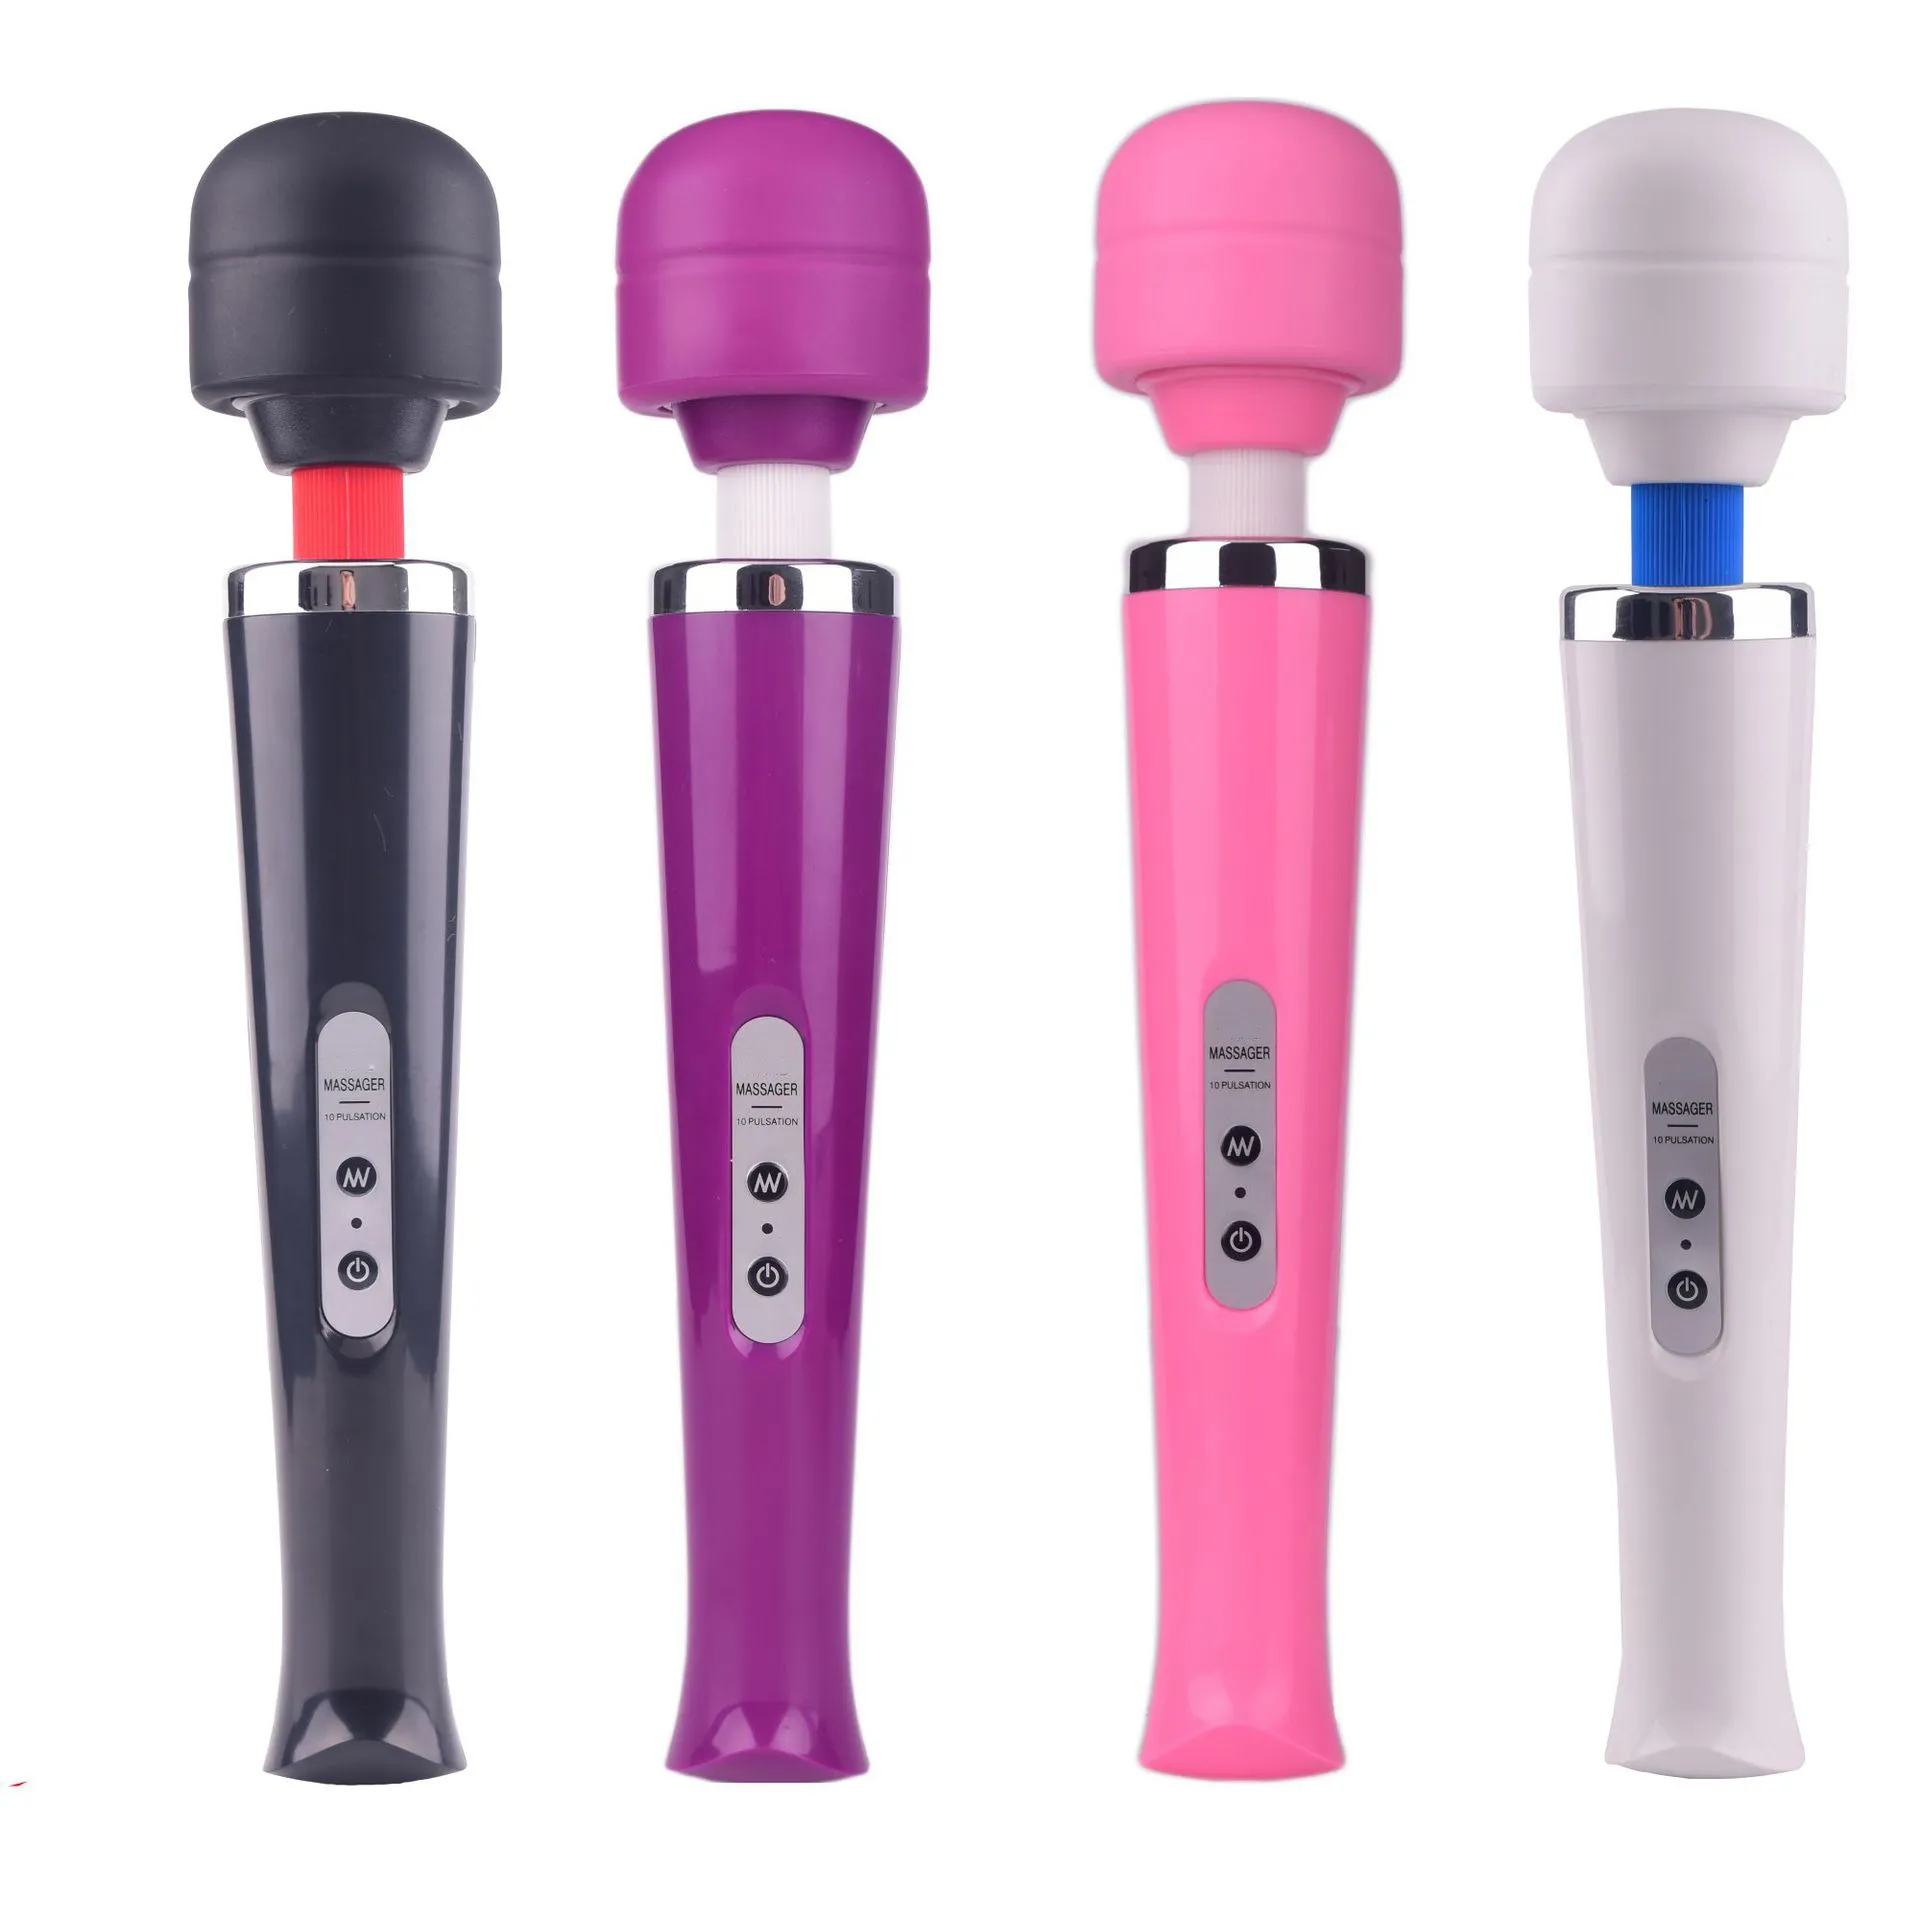 10 Speeds Massager Rechargeable Full Body Massager Relaxation Electric Personal Care Massagers Health & Beauty J2218